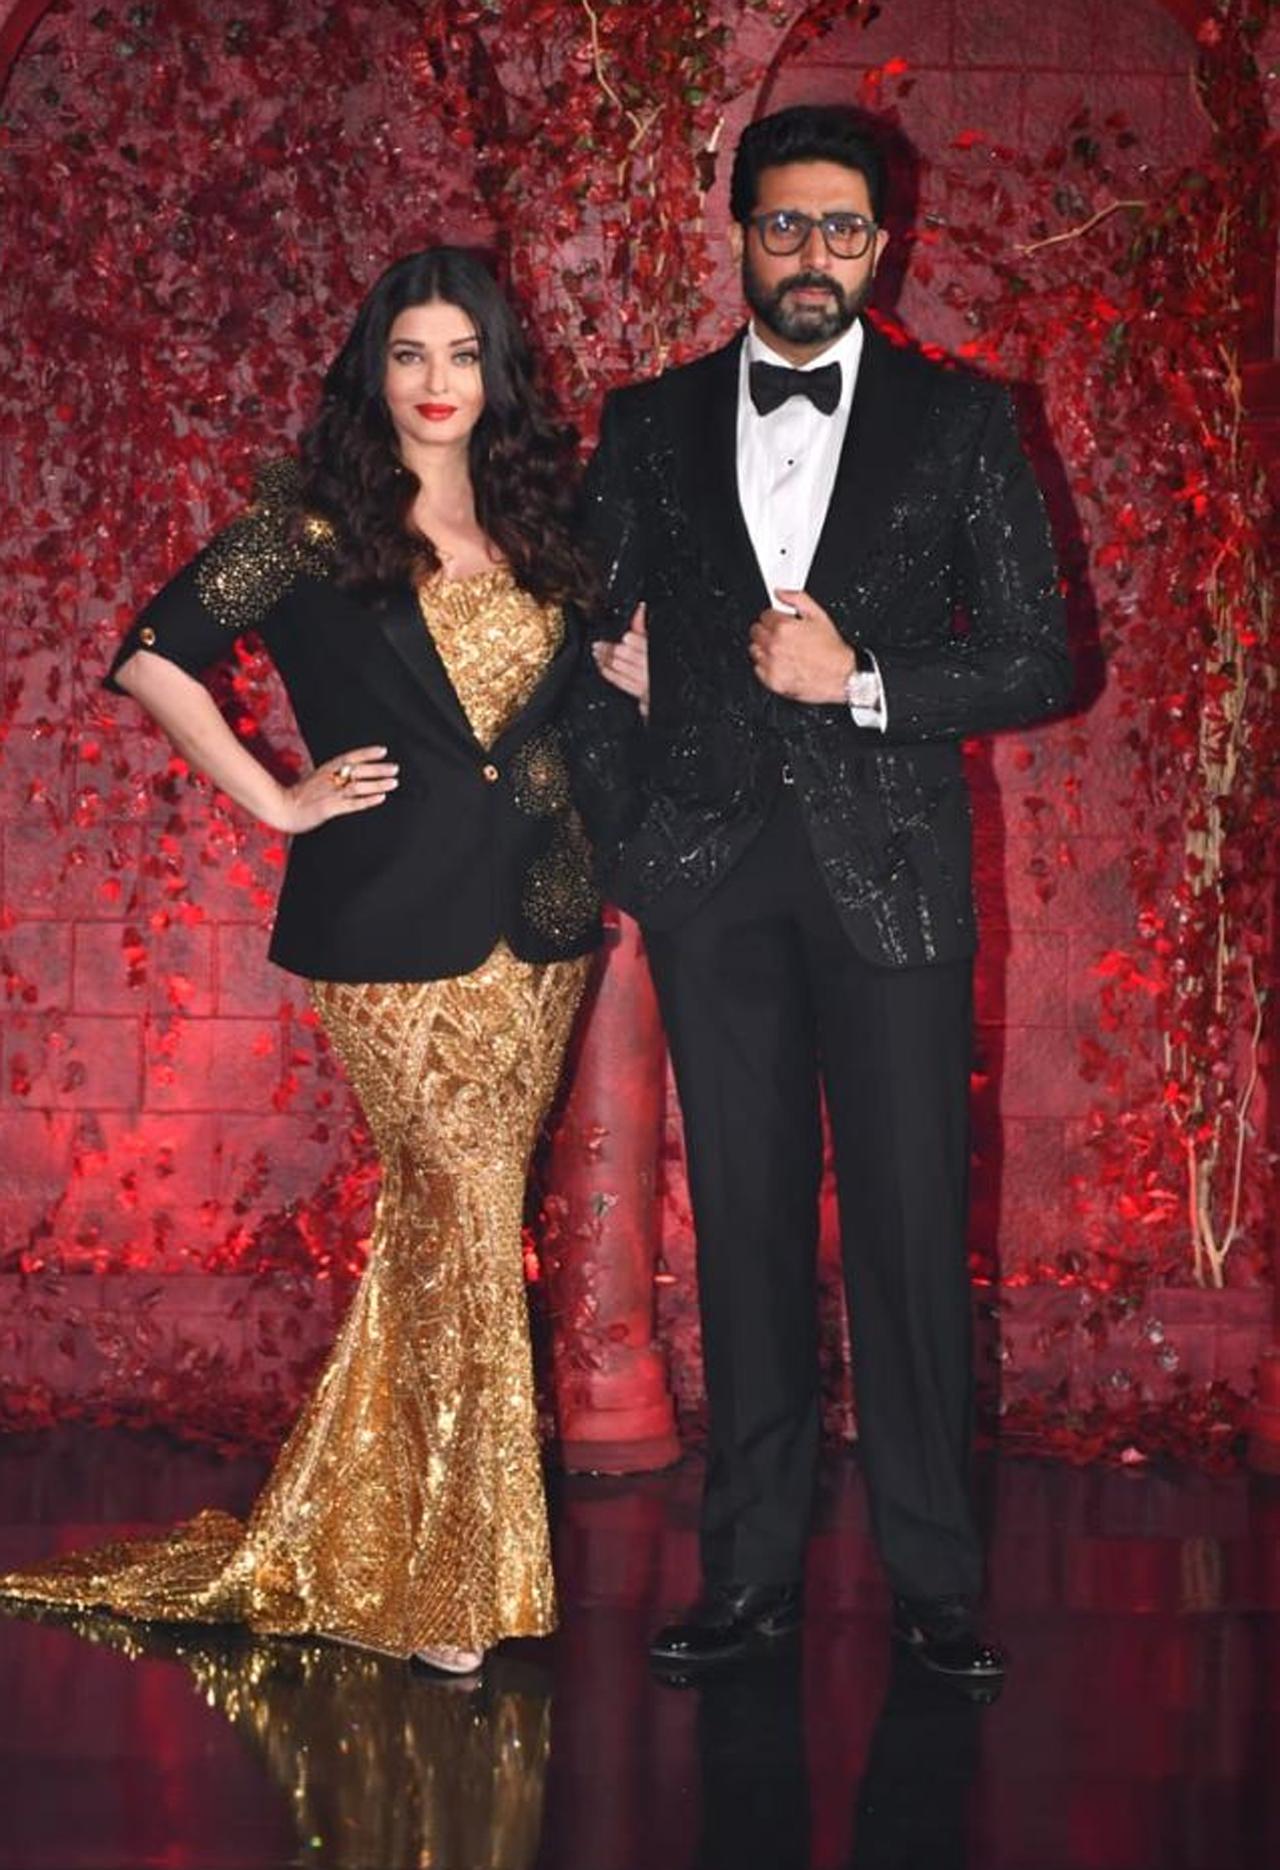 Abhishek Bachchan and Aishwarya Rai Bachchan have come back from the Cannes Film Festival and now get papped at Johar’s birthday bash. The shimmery golden gown looks perfect on Miss World who has been slaying at Cannes since 2002. She was directed by Johar in his 2016 Ae Dil Hai Mushkil. 